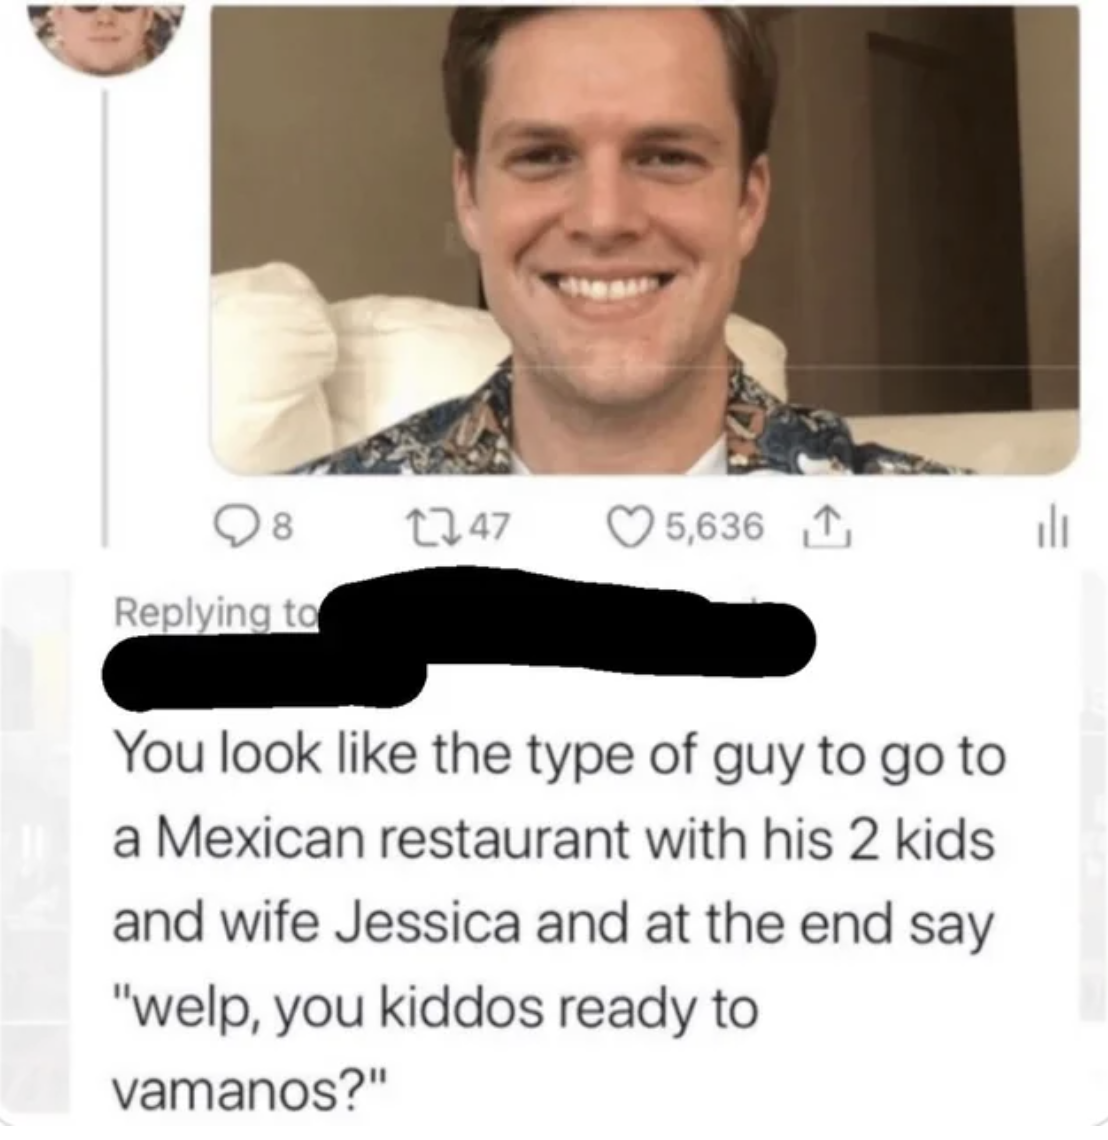 funny tweets and memes - smile - 8 1247 5,636 1 You look the type of guy to go to a Mexican restaurant with his 2 kids and wife Jessica and at the end say "welp, you kiddos ready to vamanos?" l